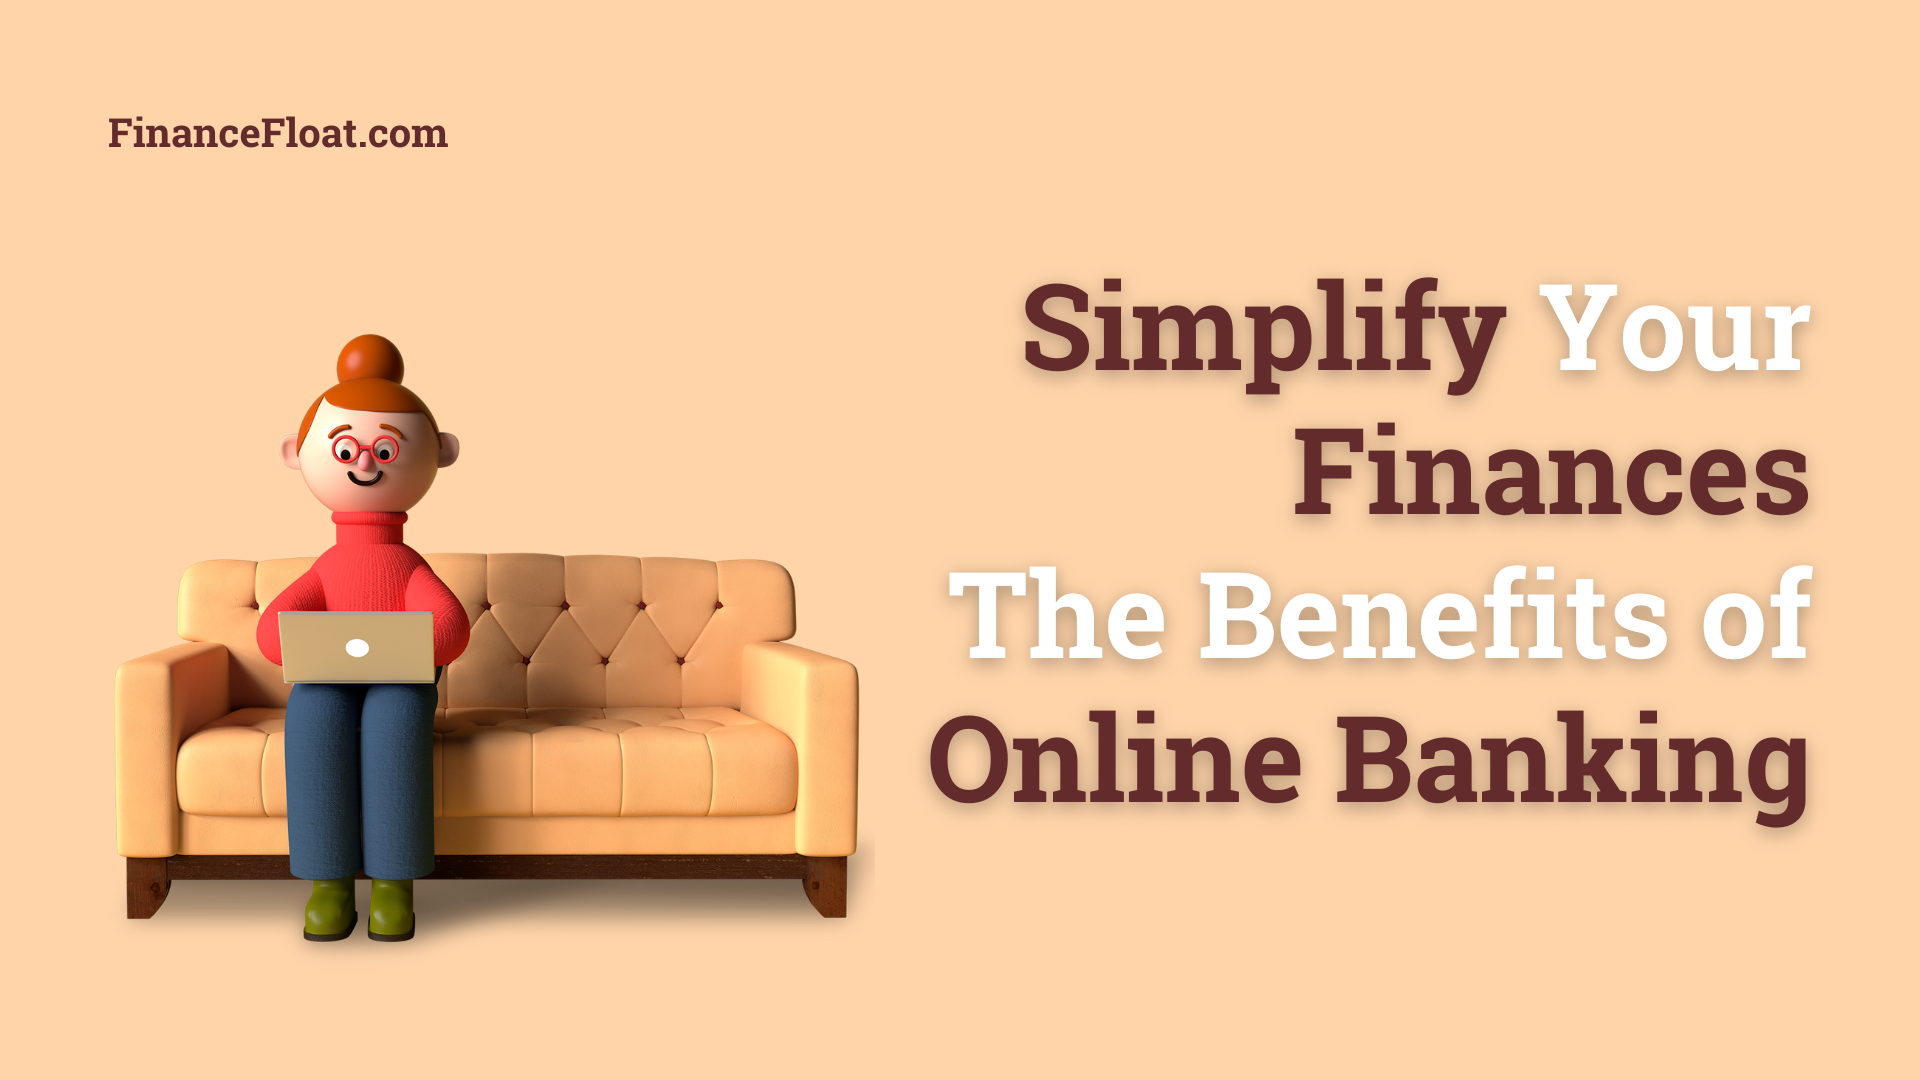 Simplify Your Finances The Benefits of Online Banking